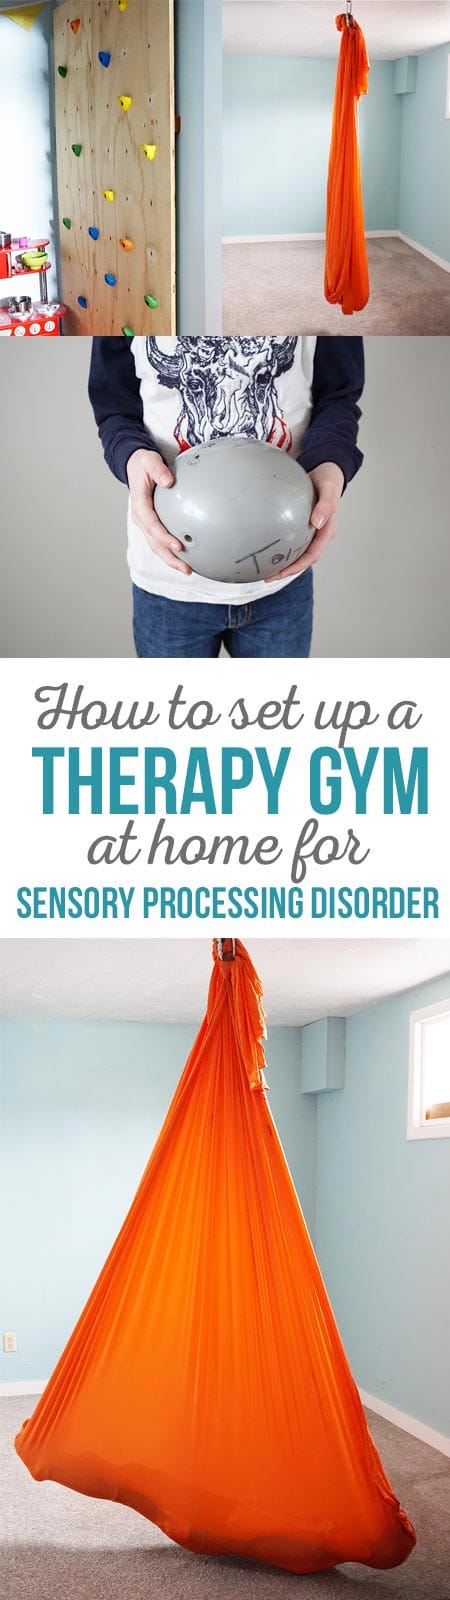 Therapy Gym for SPD -What you need to set up a therapy gym at home for sensory processing disorder.